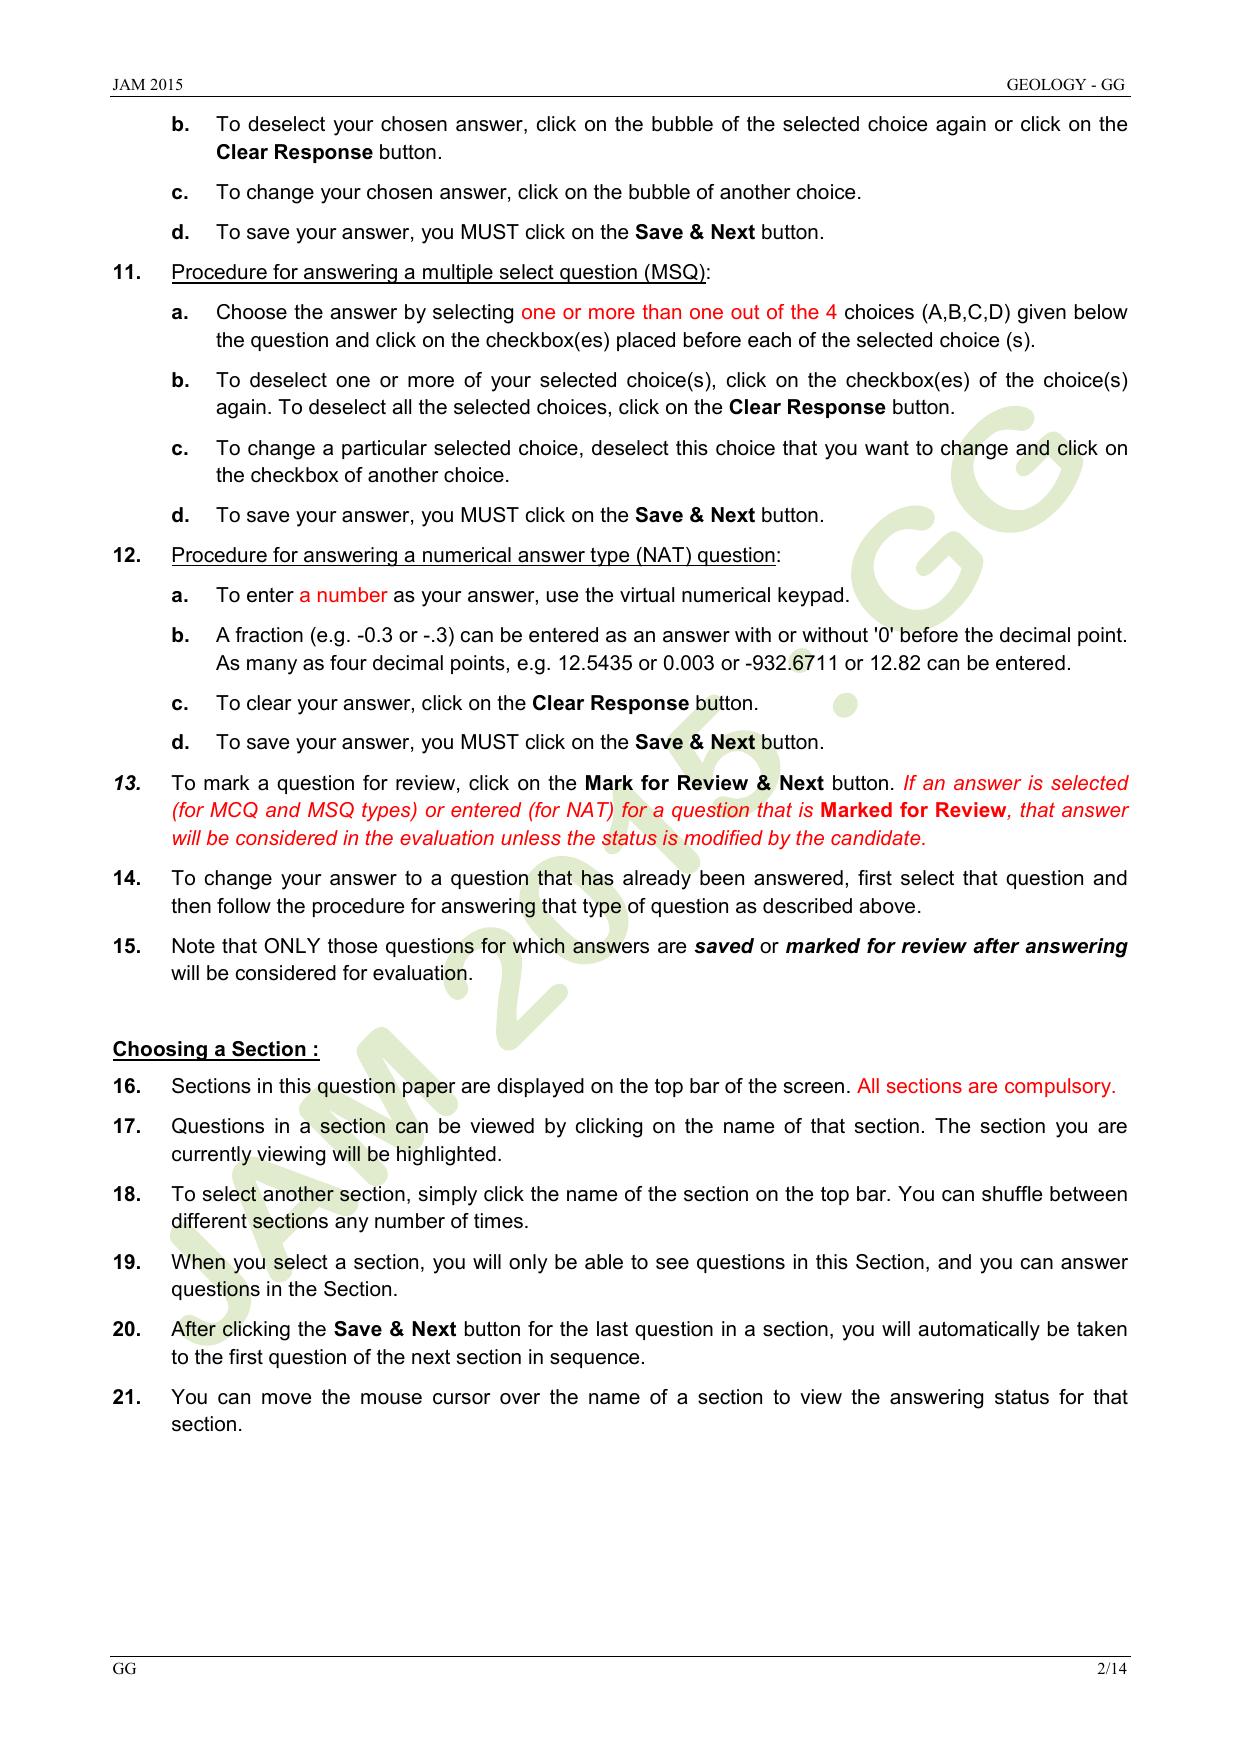 JAM 2015: GG Question Paper - Page 2